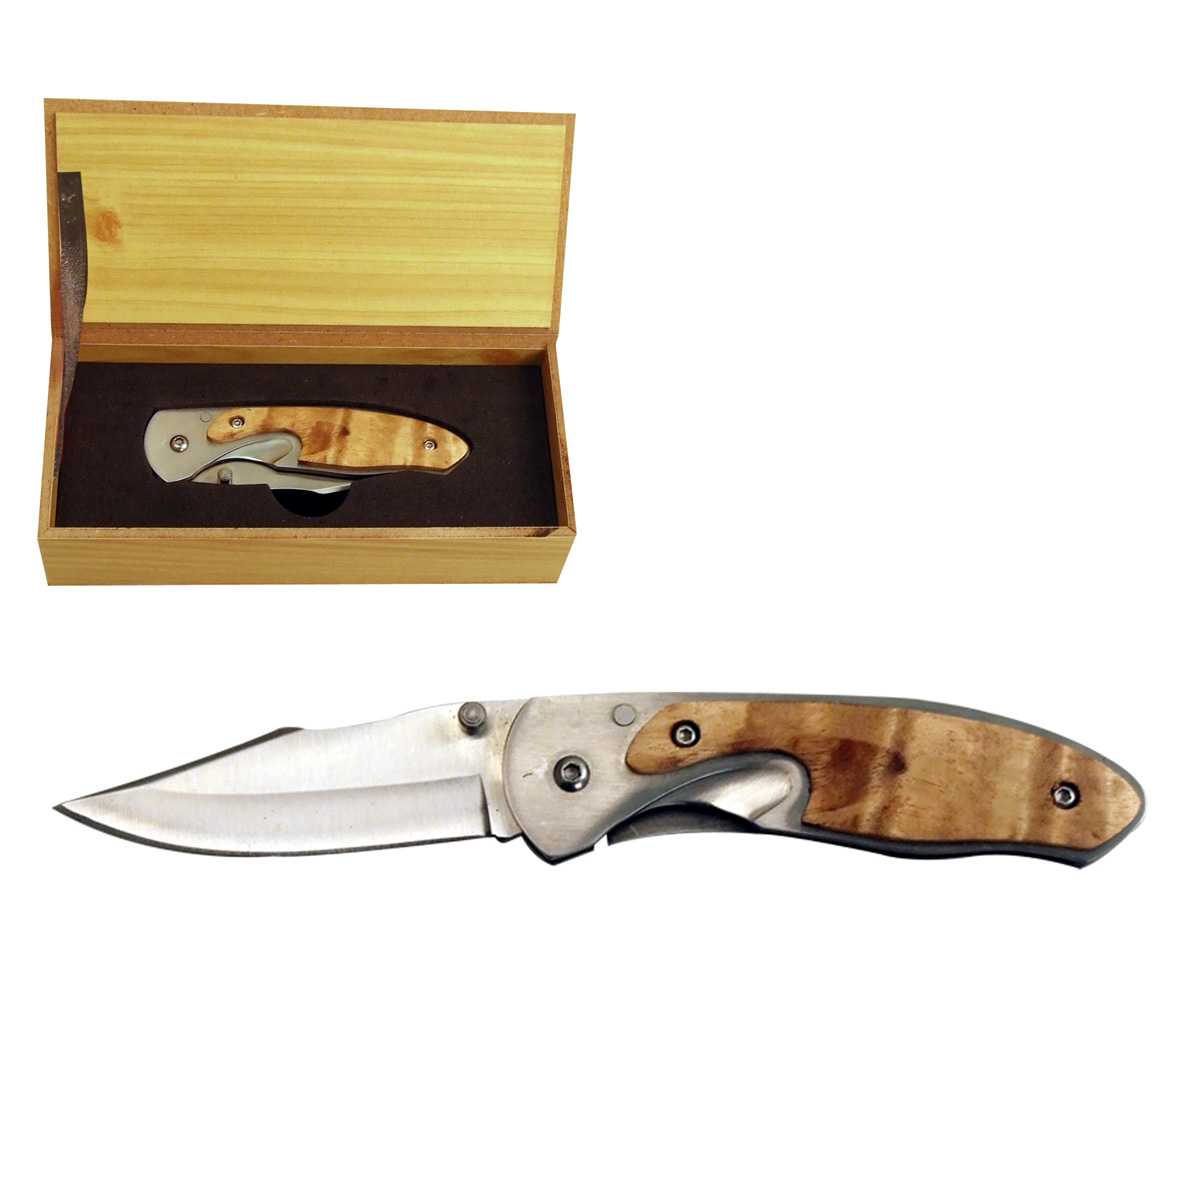 Stainless Steel And Wood Folding  Knife In Wooden Box (14X6X3.5C